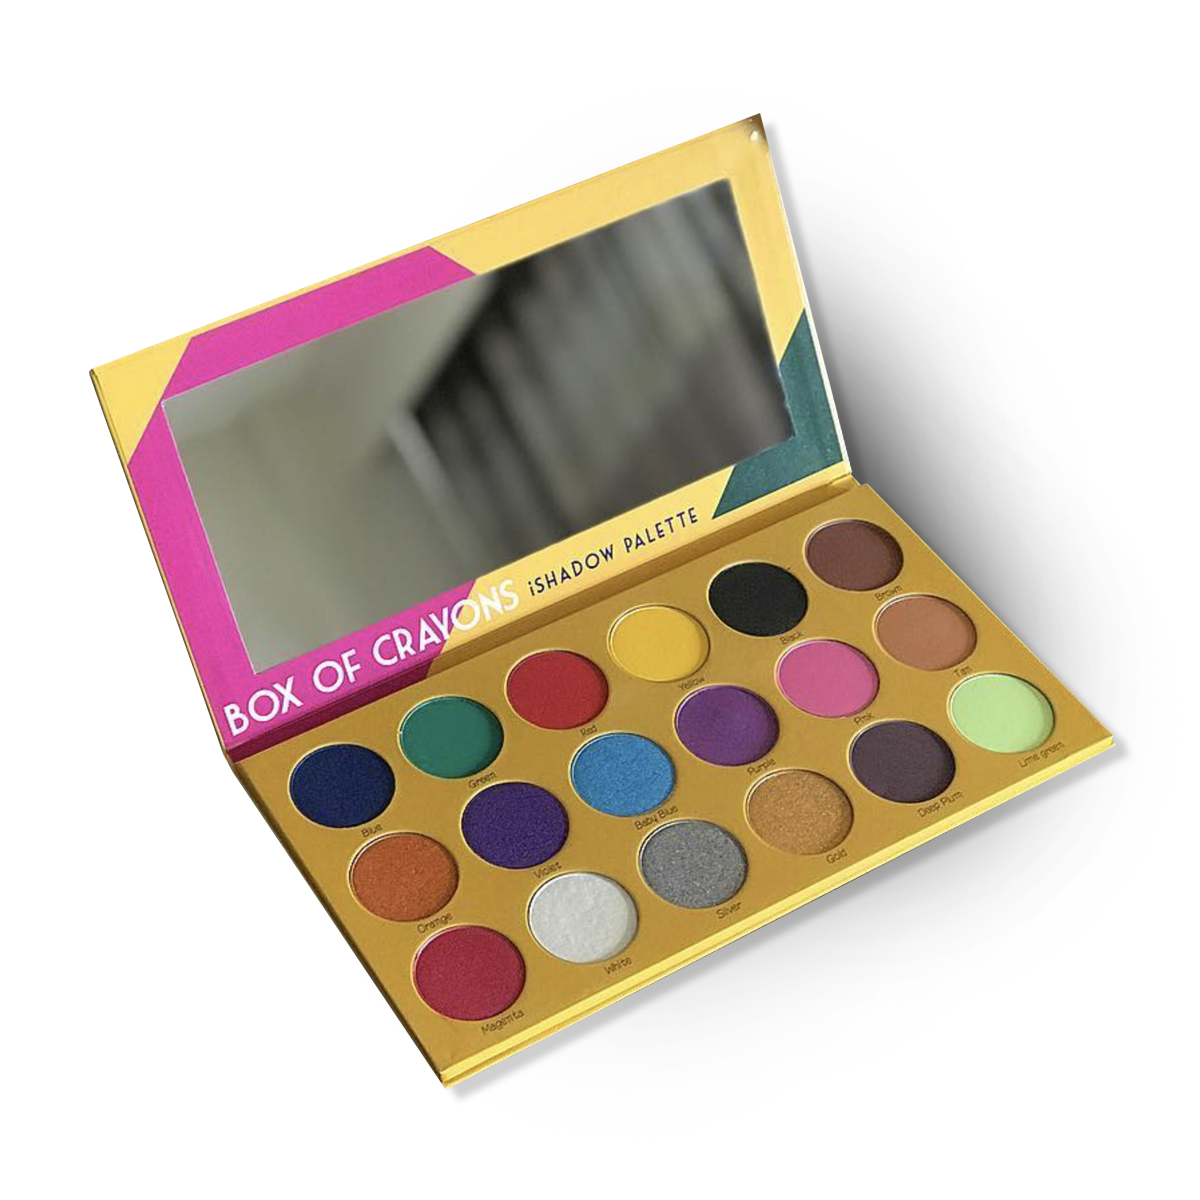 Box Of Crayons iShadow Palette By The Crayon Case NEW 18 Shadows, Mirror